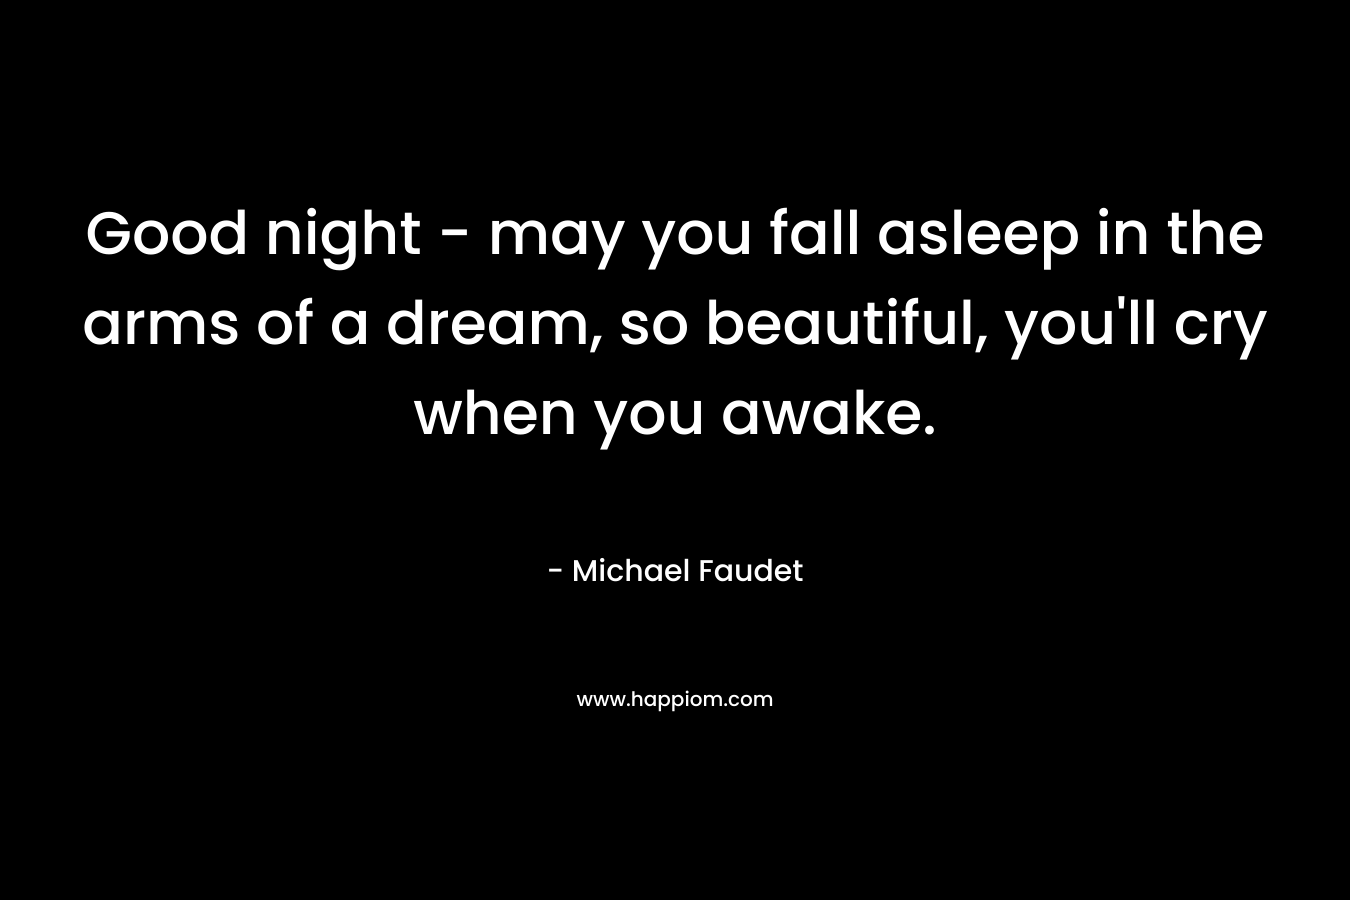 Good night - may you fall asleep in the arms of a dream, so beautiful, you'll cry when you awake.